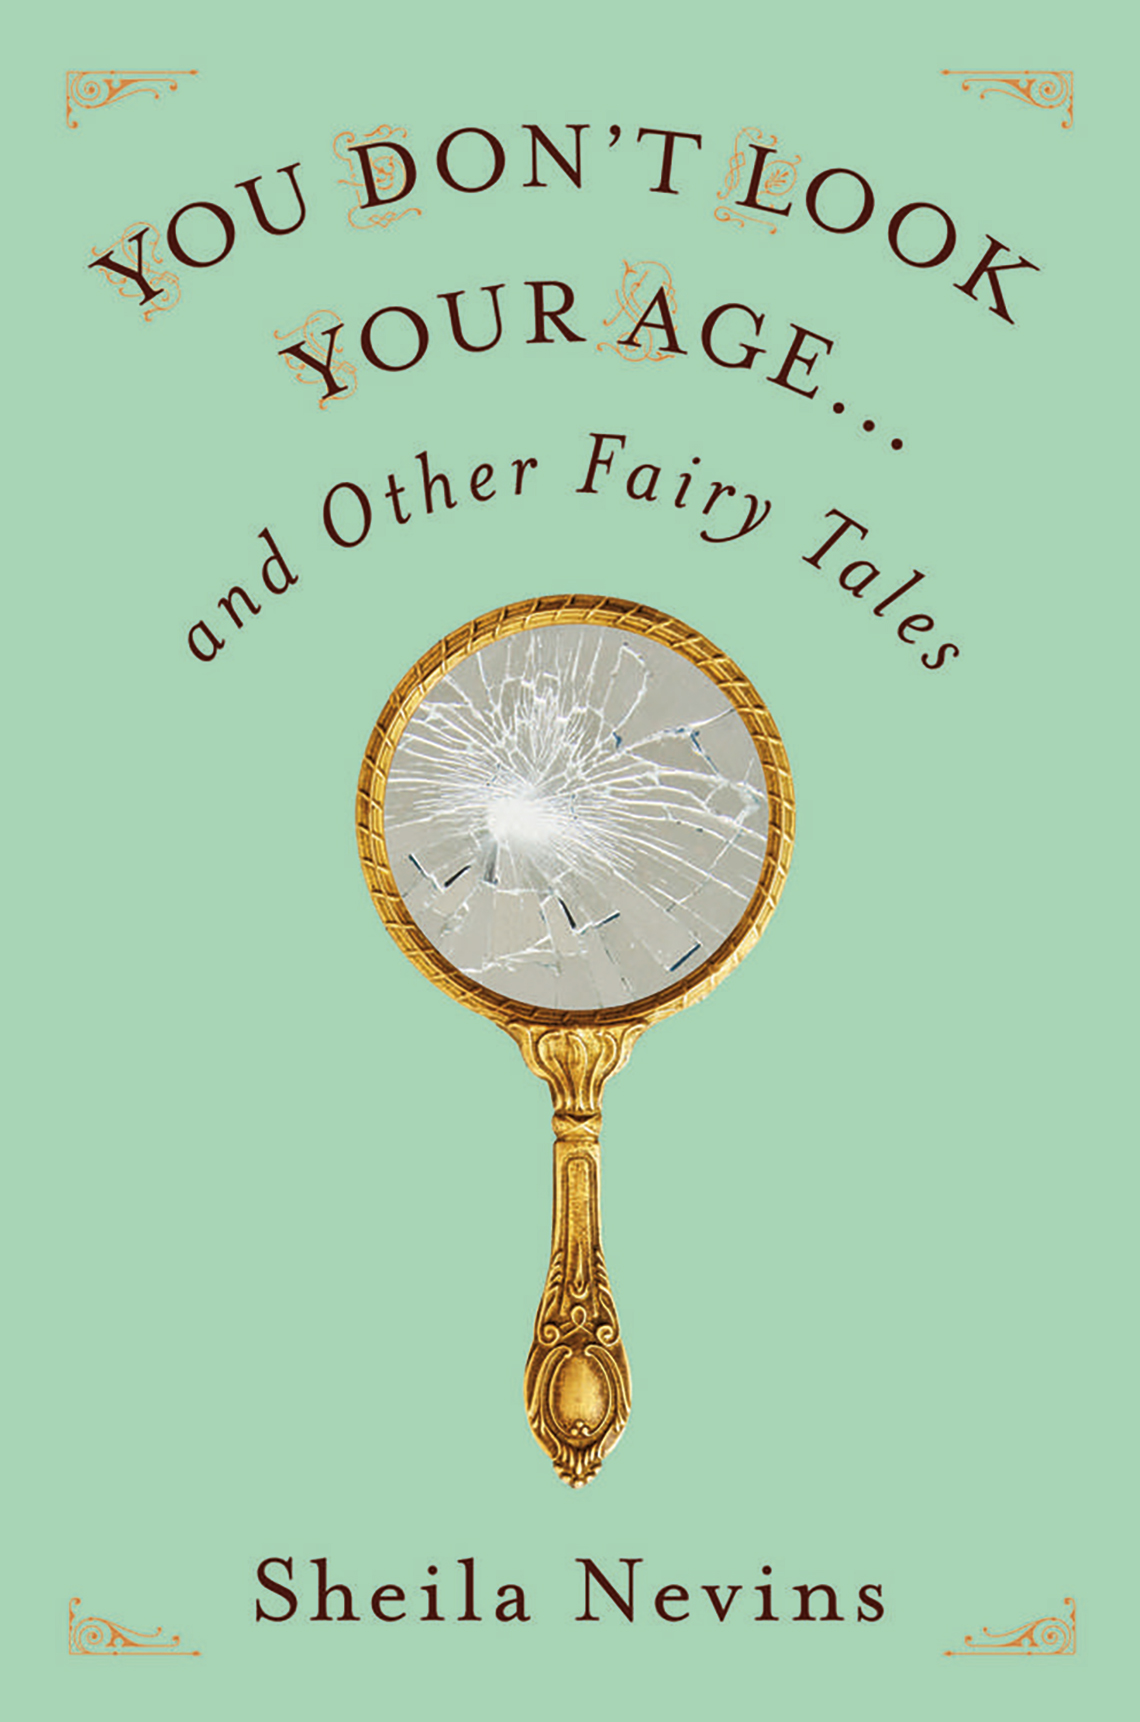 You Don’t Look Your Age… And Other Fairy Tales, by Sheila Nevins   